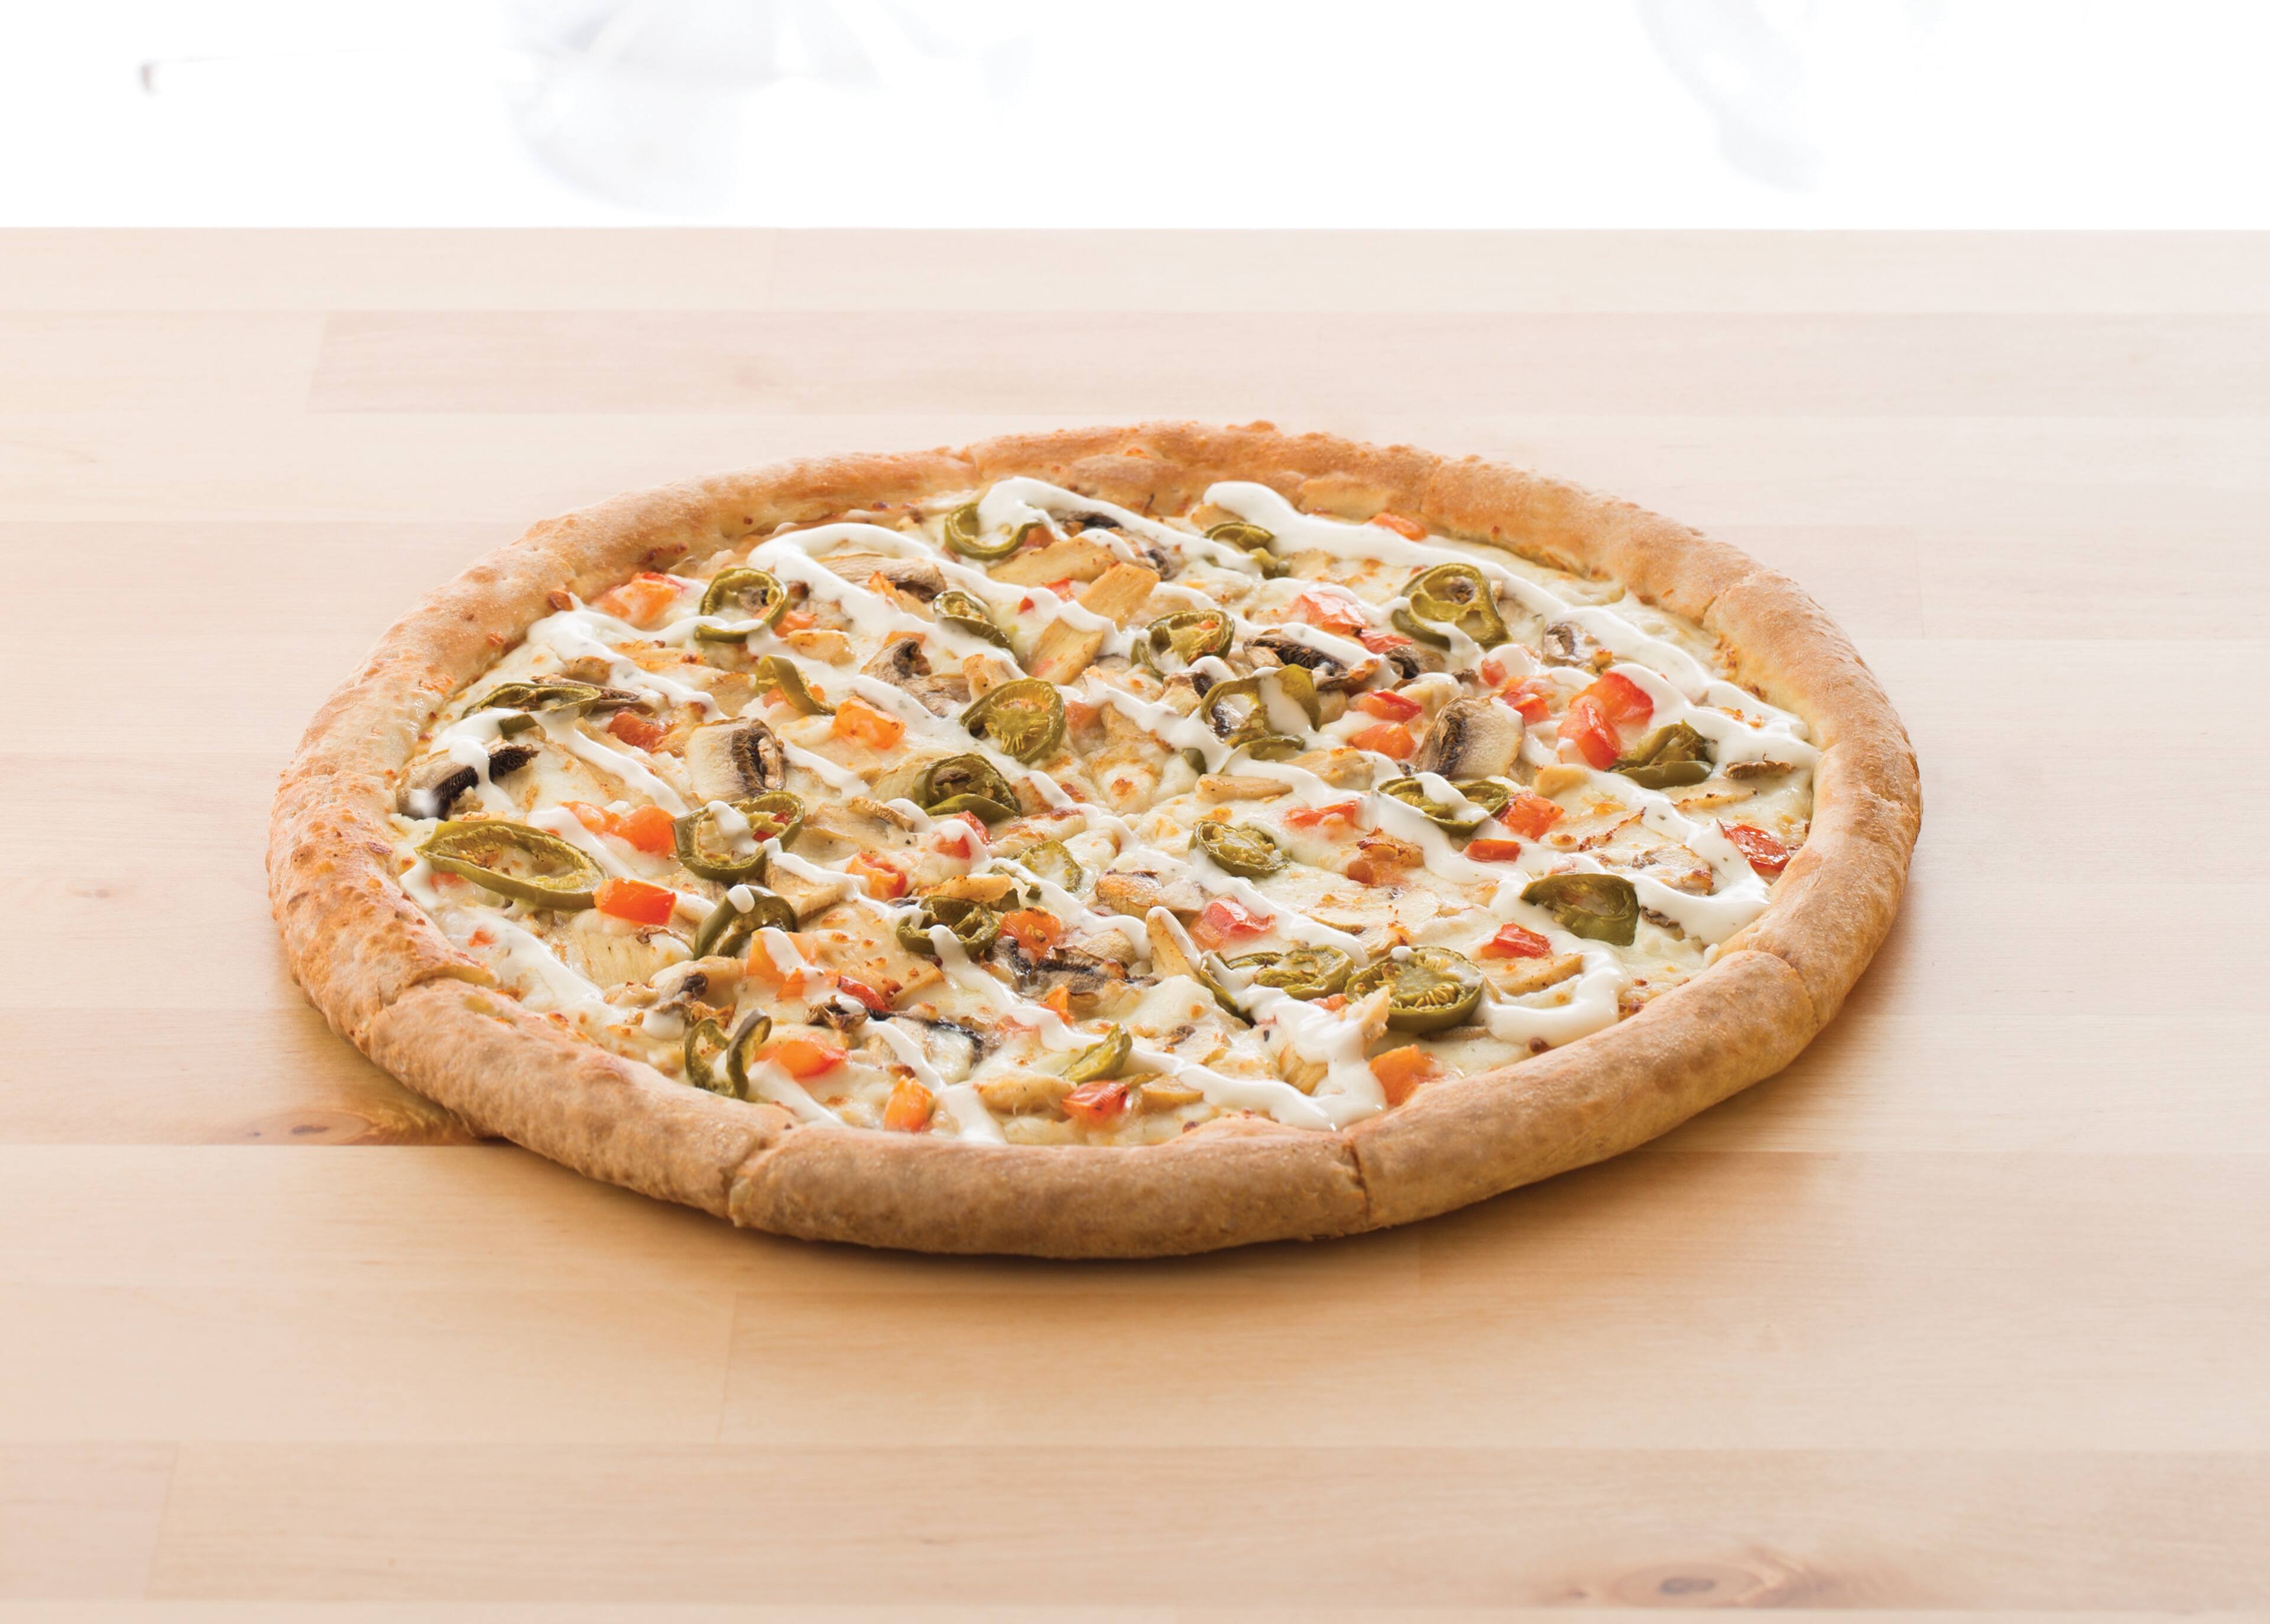 Have you tried our new 'Spicy NoChicken Vegan Ranch Pizza yet